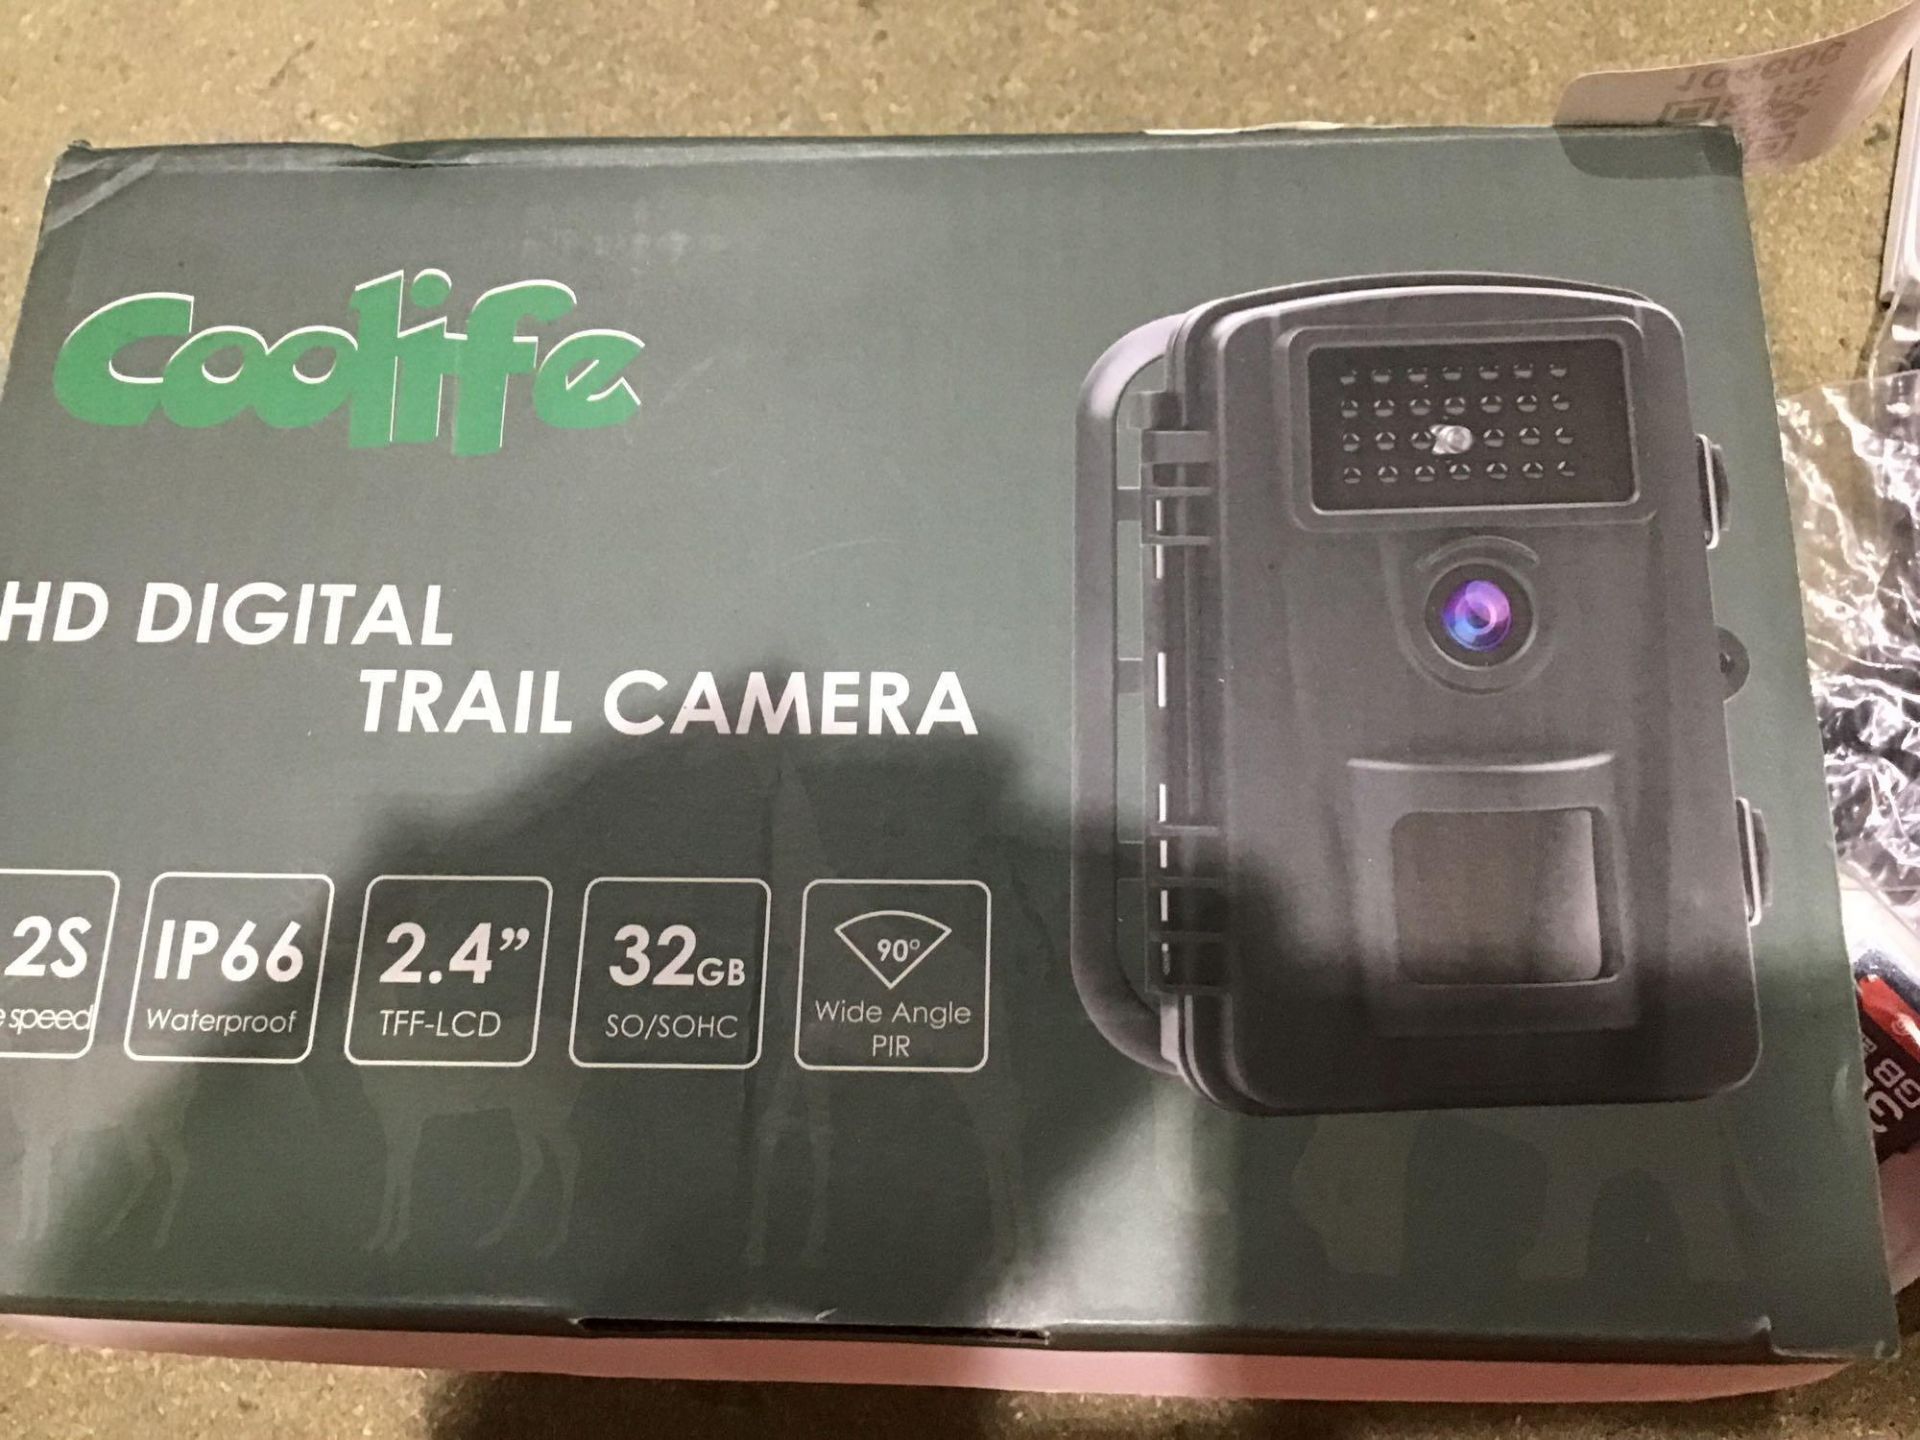 Coolife Wildlife Camera and IP66 Waterproof Hunting Camera with 32G SD Card - Image 3 of 4